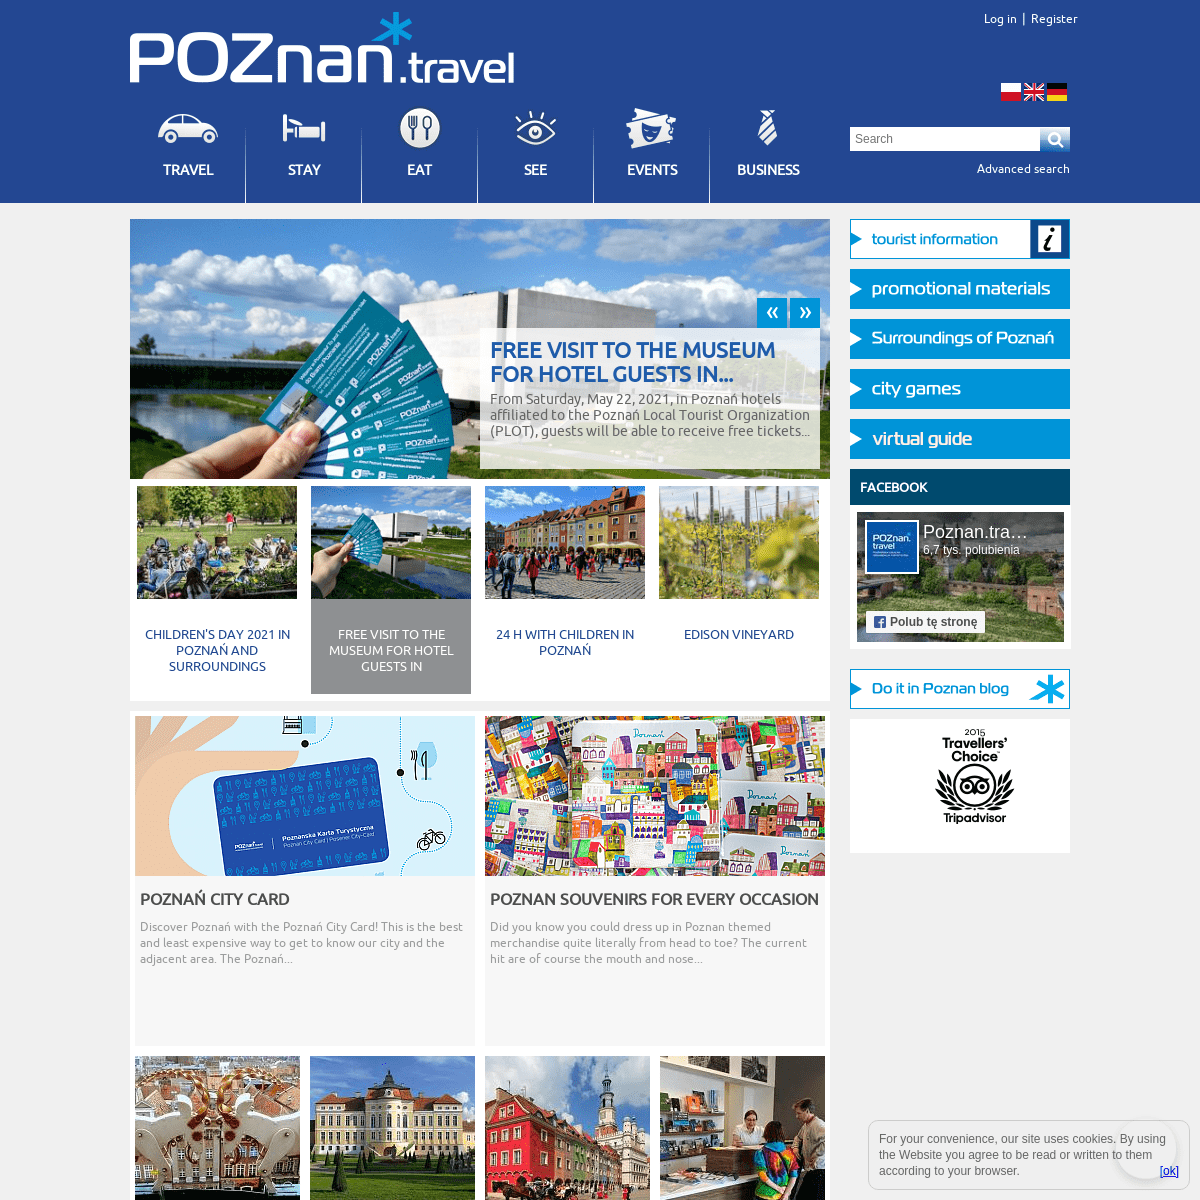 A complete backup of https://poznan.travel